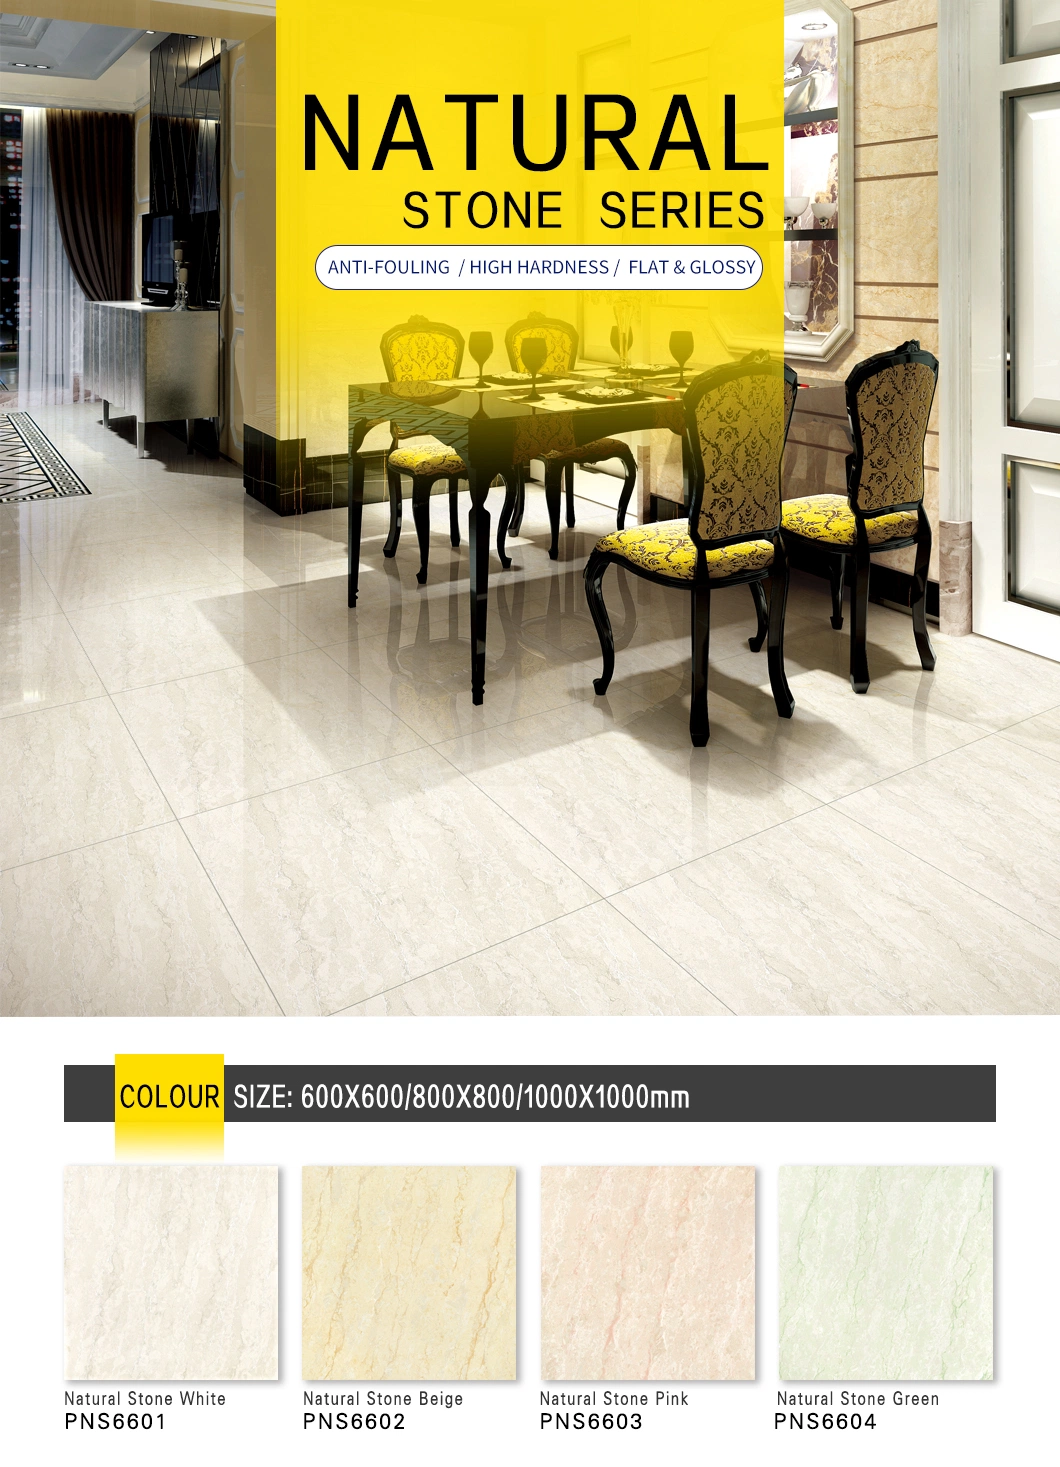 Natural Stone Series Environmental Friendly Polished Porcelain Tiles 24X24 36X36 Inches Floor Tiles